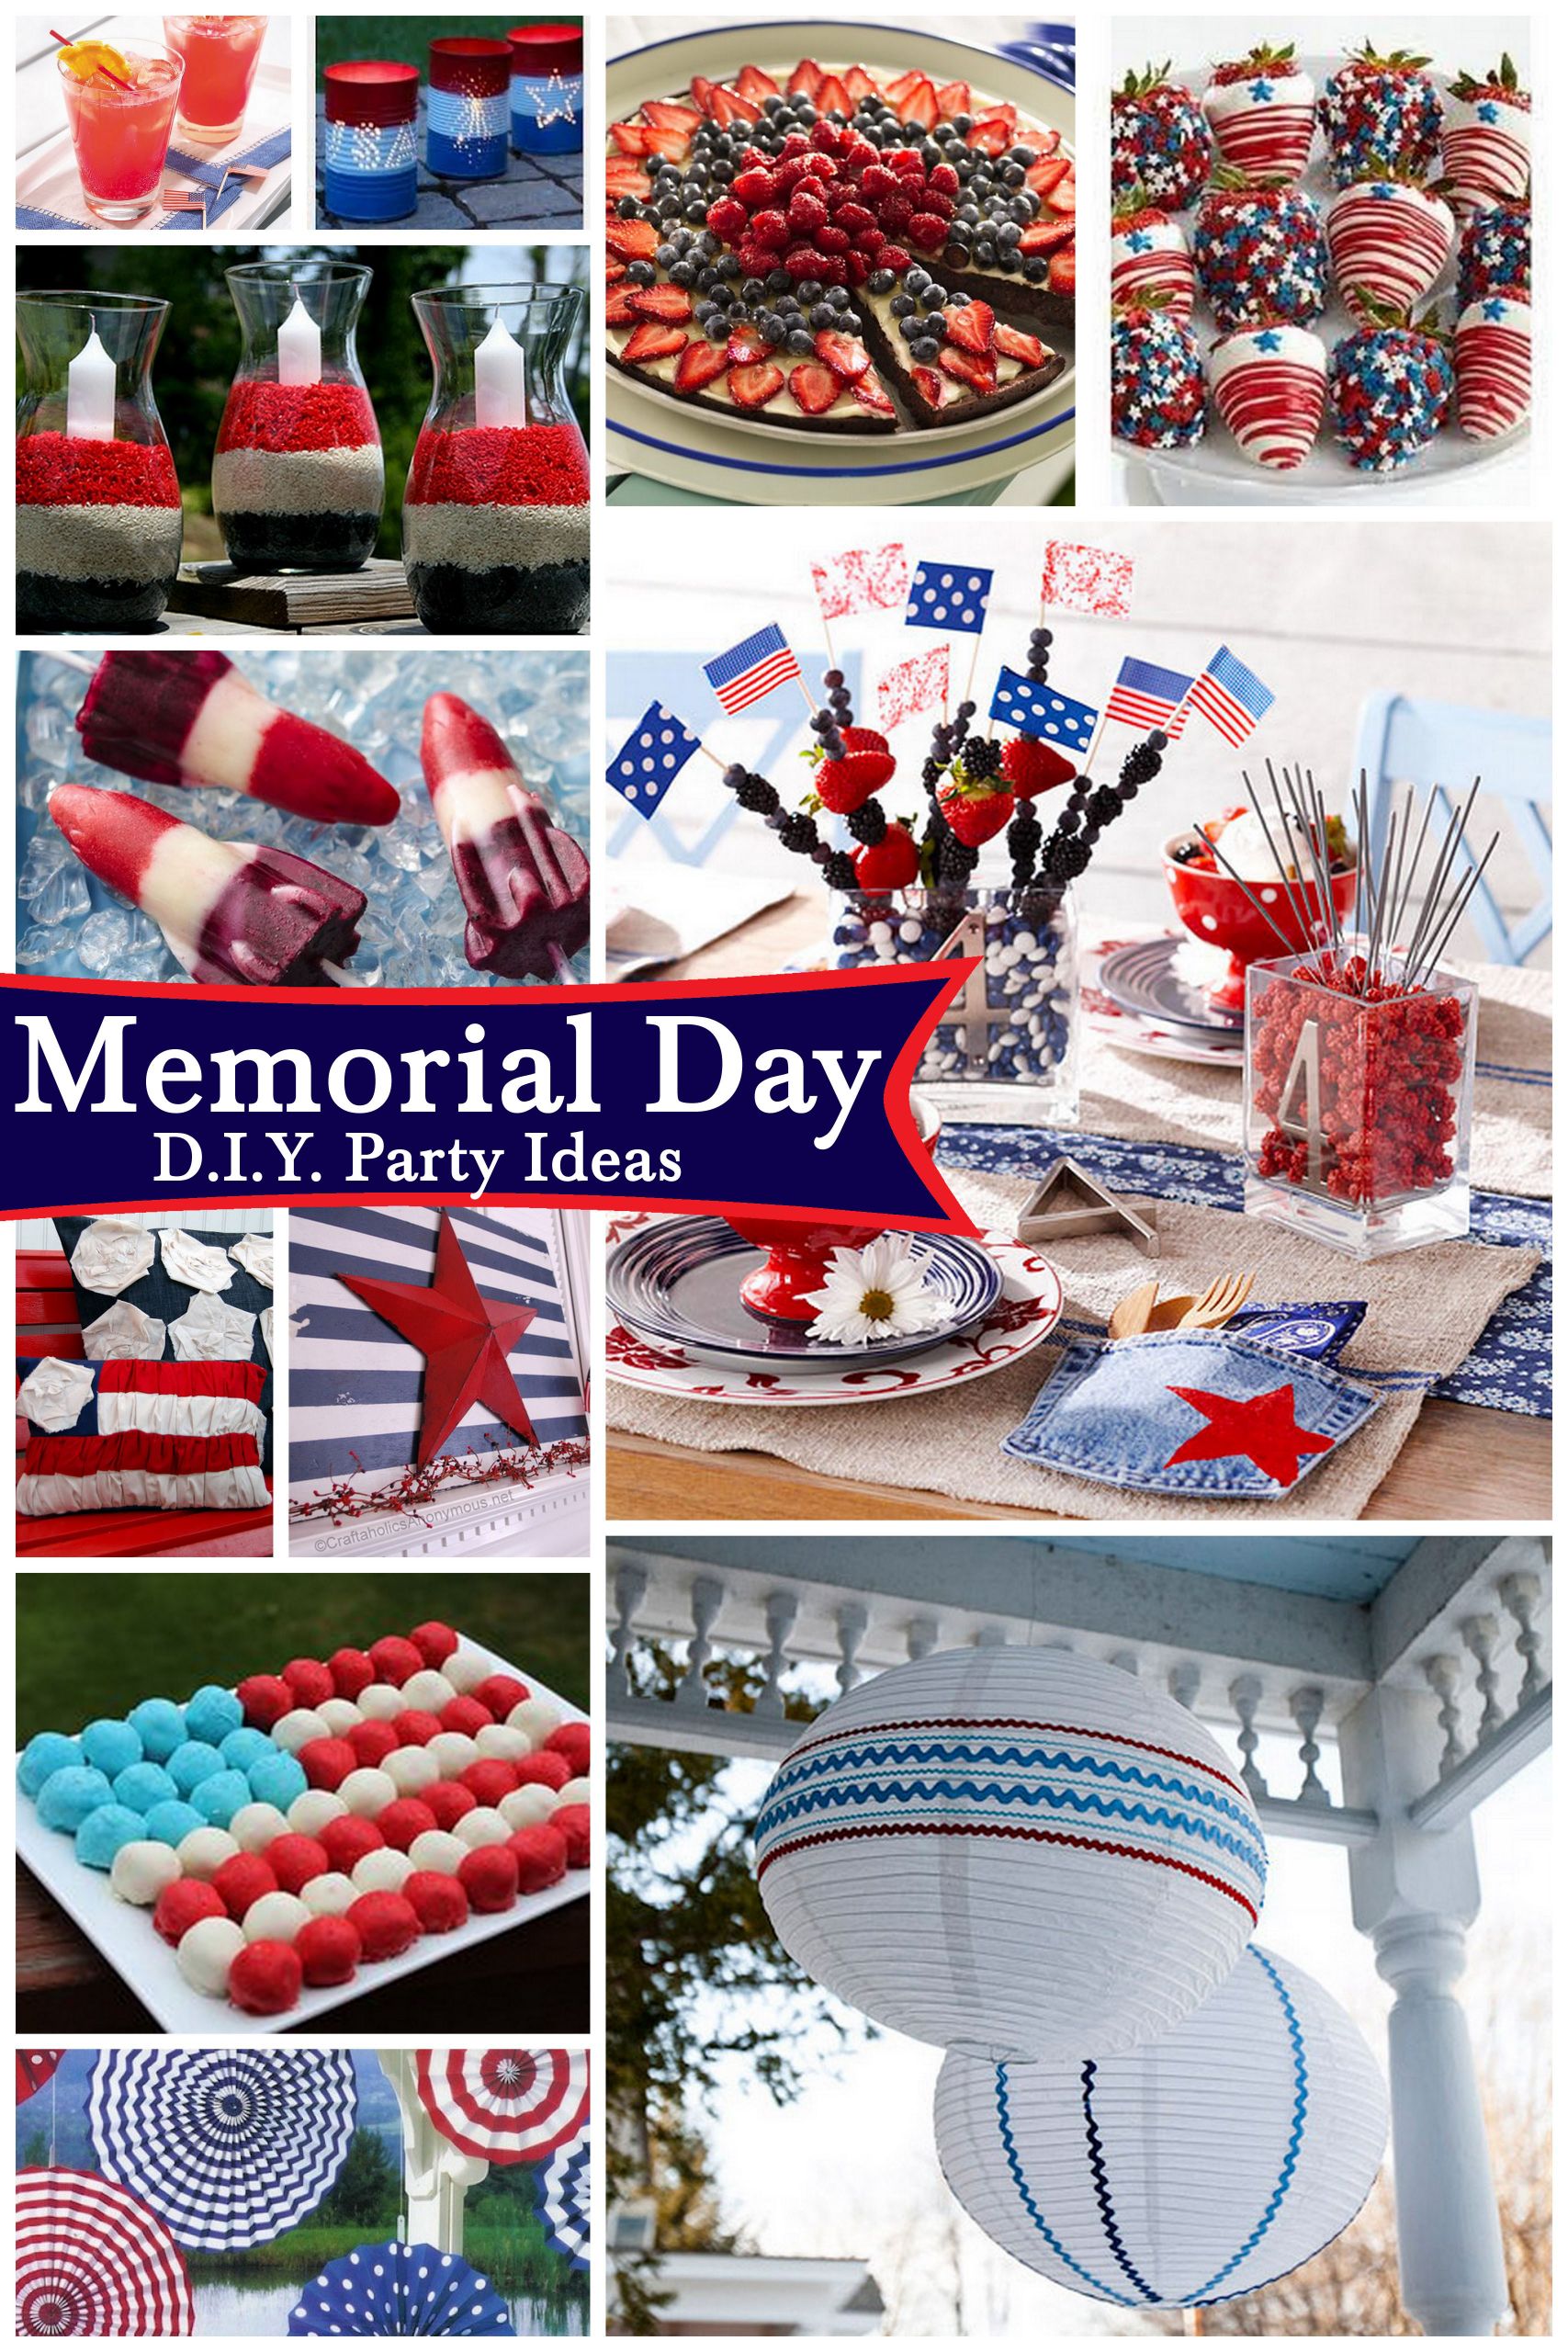 Memorial Day Party Decorations
 Memorial Day D I Y Party Ideas